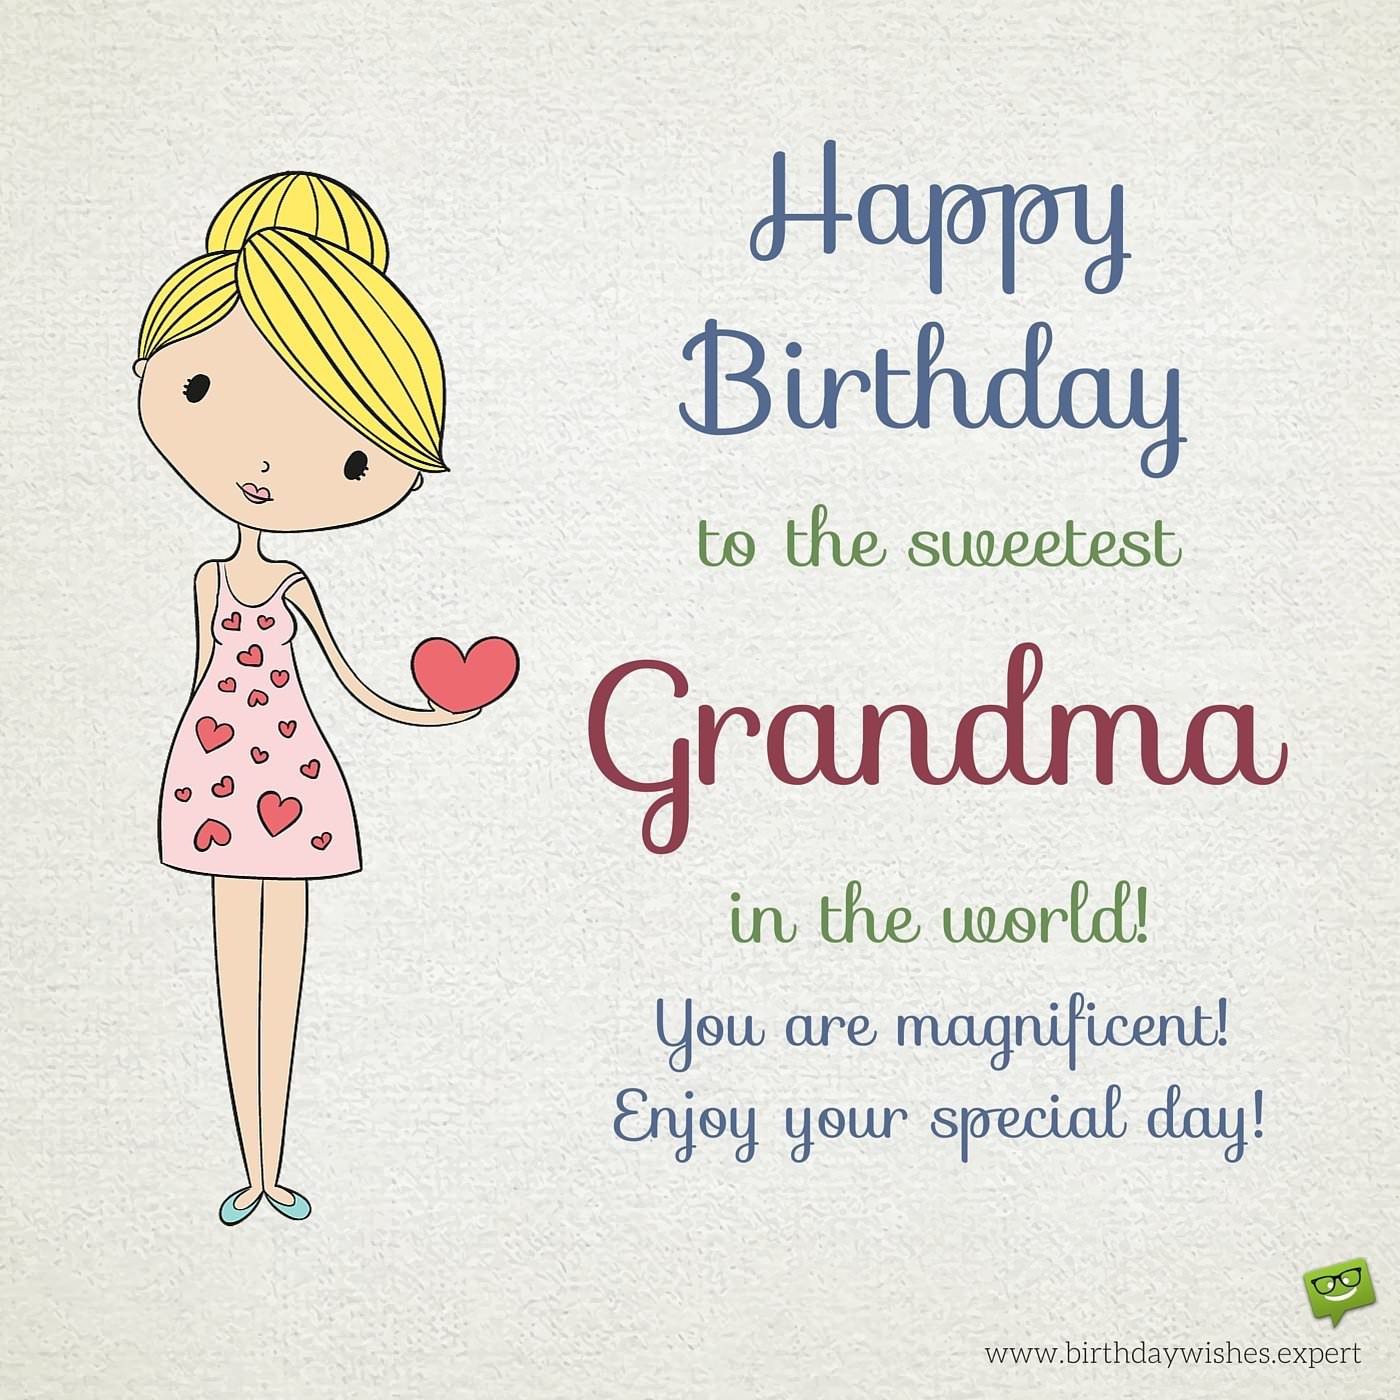 Happy Birthday Grandma Warm Wishes For Your Grandmother,What Temperature To Bake Chicken